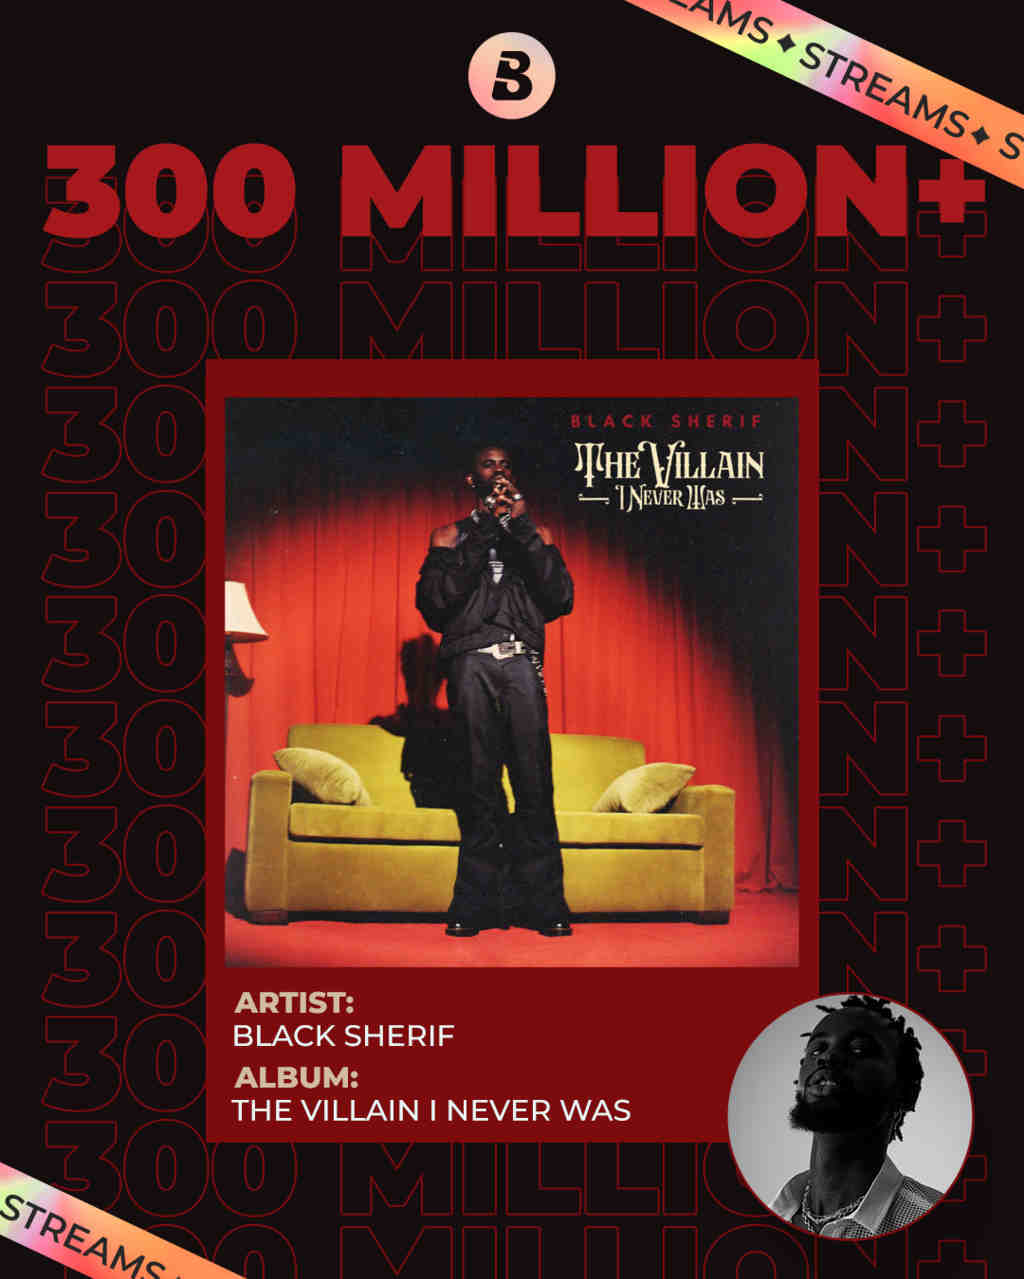 Black Sherif Receives Boomplay Plaque for 300M+ Streams Milestone